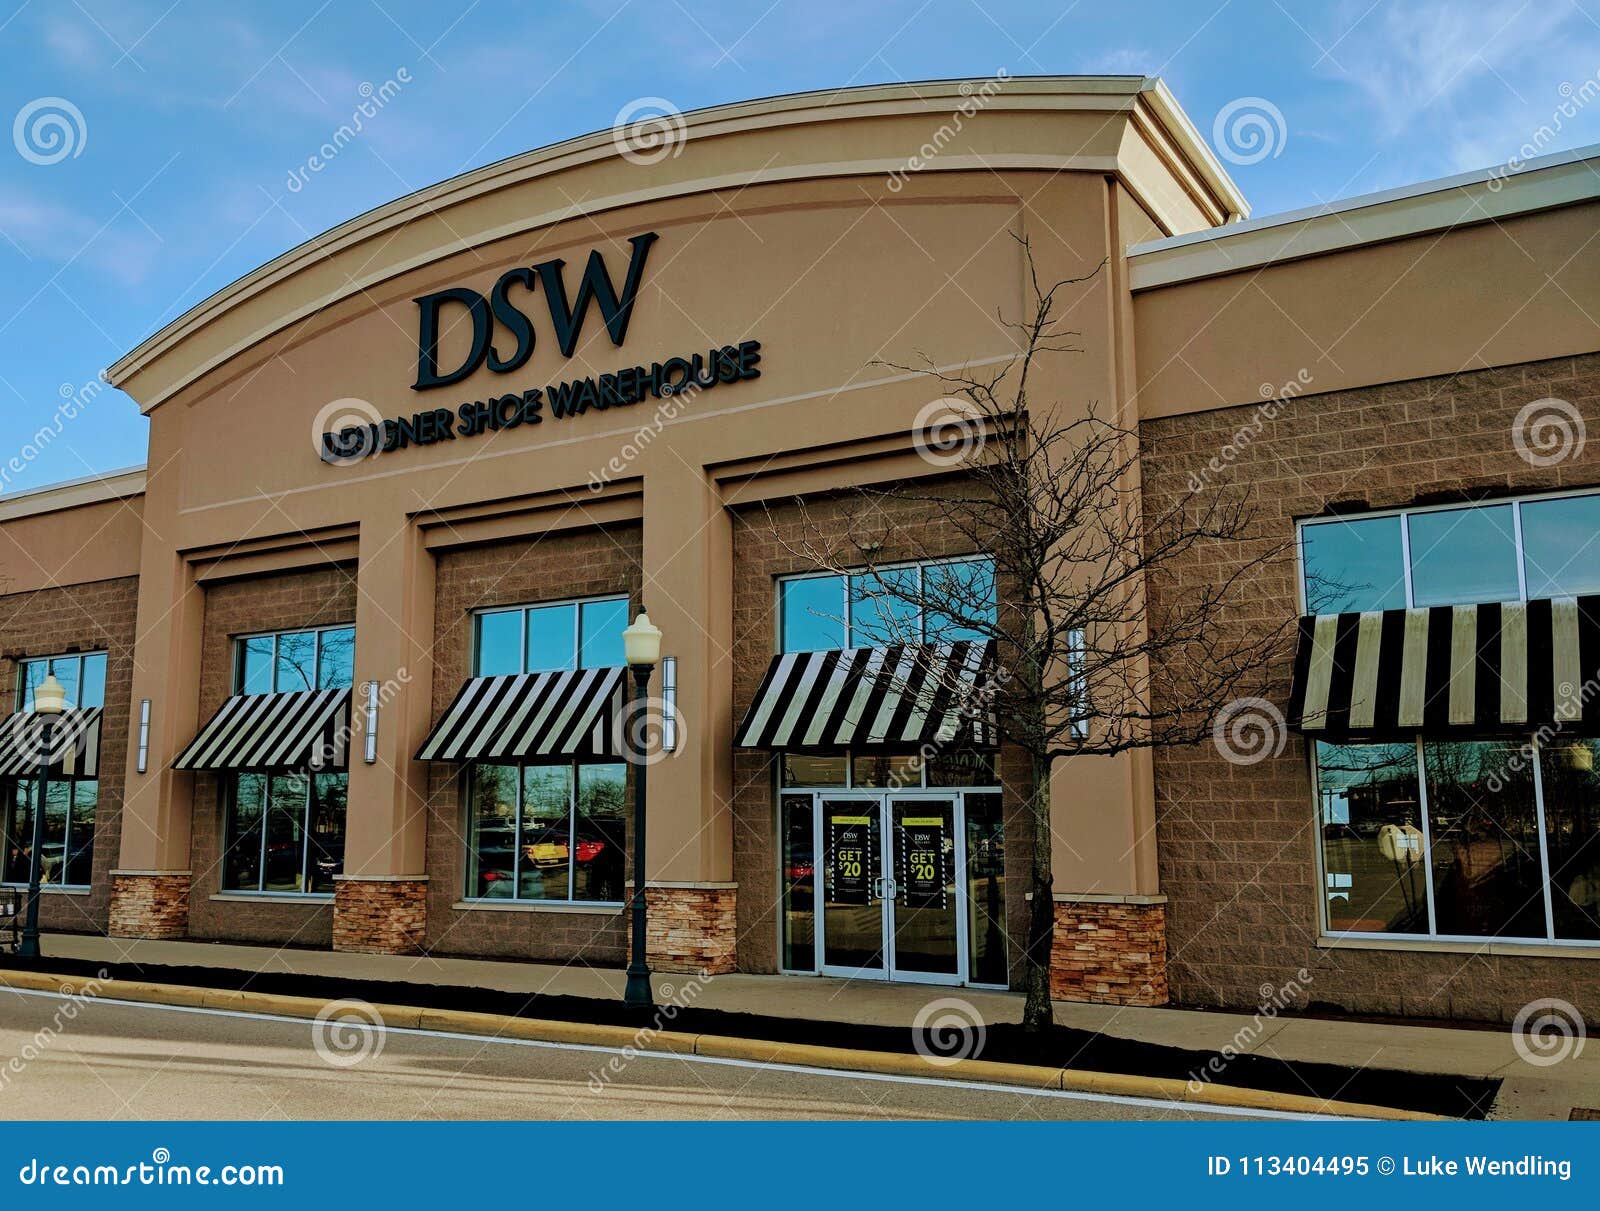 Beloved shoe store and DSW rival to close all stores forever due to  bankruptcy after 74 years in business | The US Sun